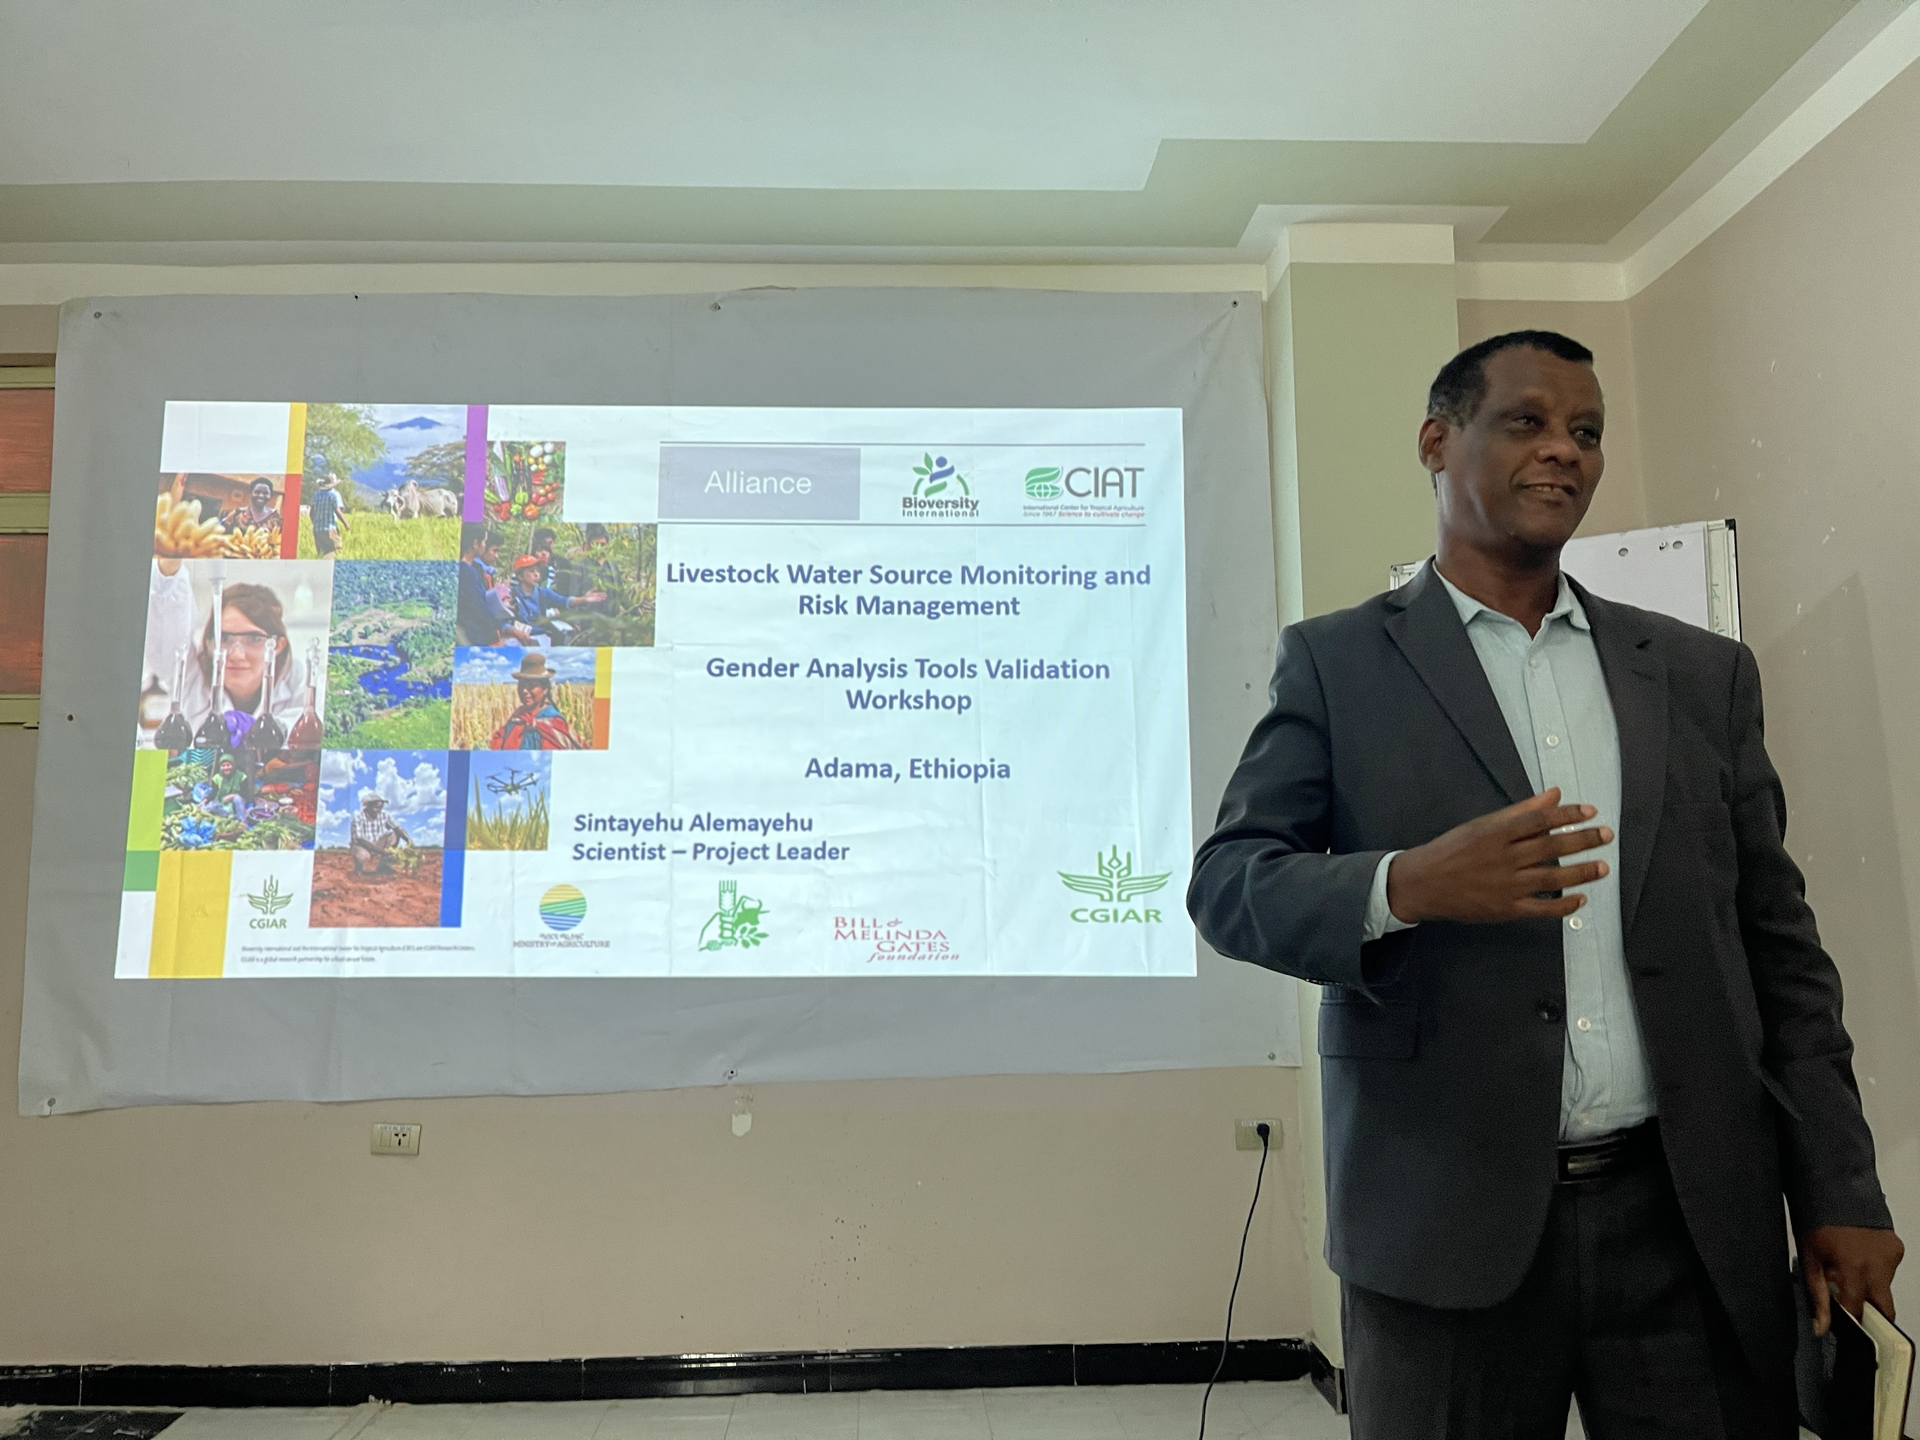 Developing gender responsive water monitoring information system to mitigate drought risks in pastoral areas - Dr. Girma Mamo - Alliance Bioversity International - CIAT